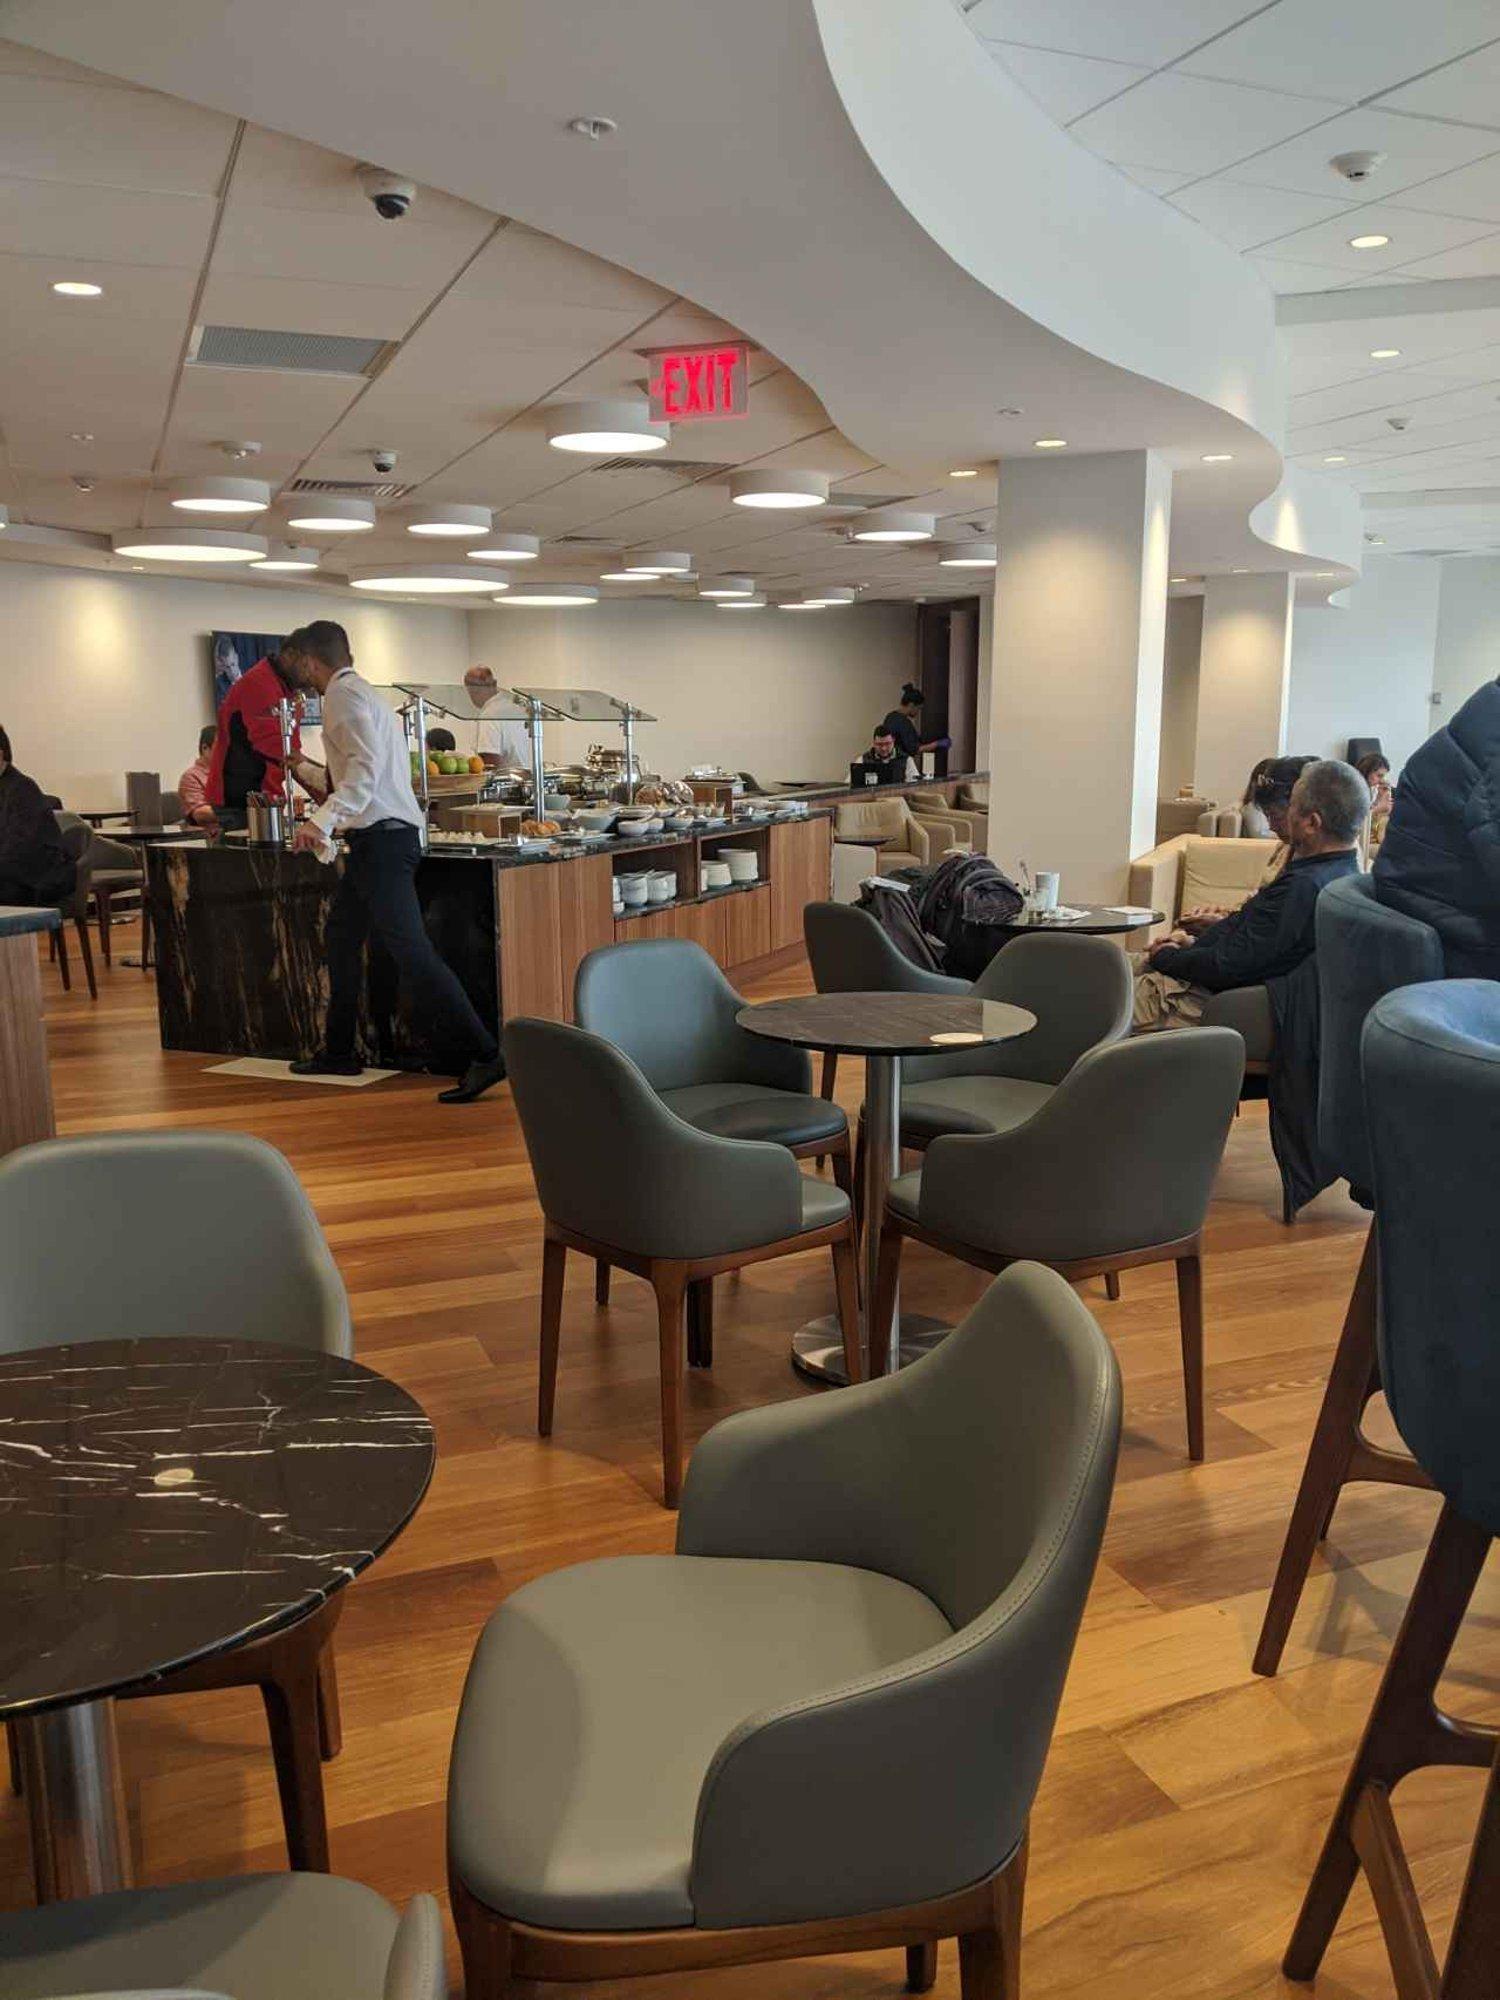 Turkish Airlines Lounge Miami image 7 of 7